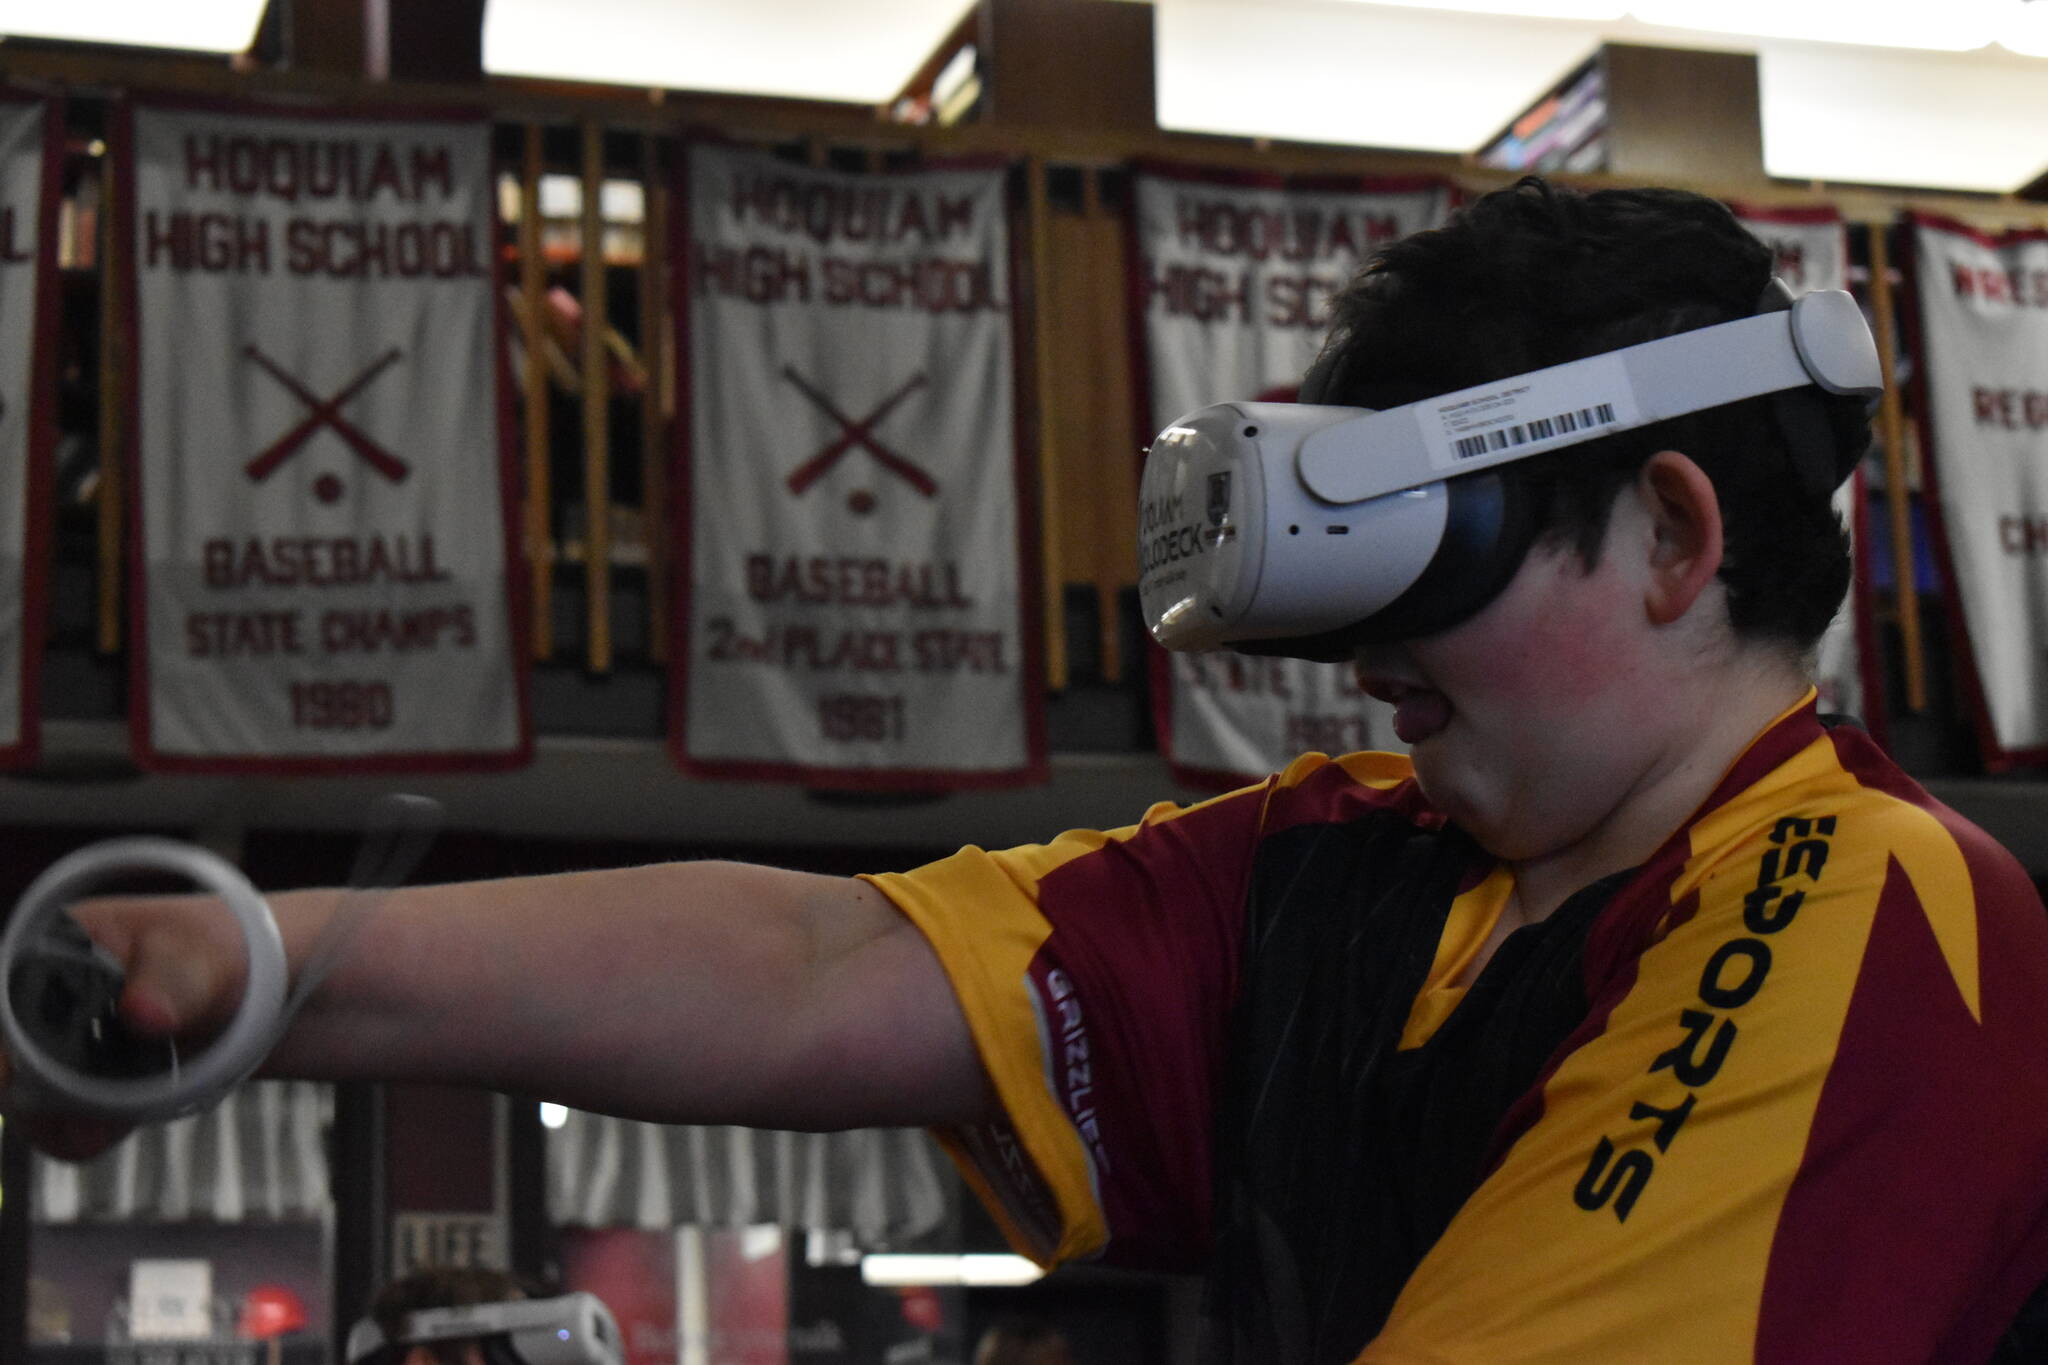 Makai Strum, a member of the Hoquiam Esports middle school team, plays a game of Echo VR, a virtual reality game where players control bodies of robots and attempt to score on opponents in something like a zero-gravity hockey arena. (Clayton Franke / The Daily World)